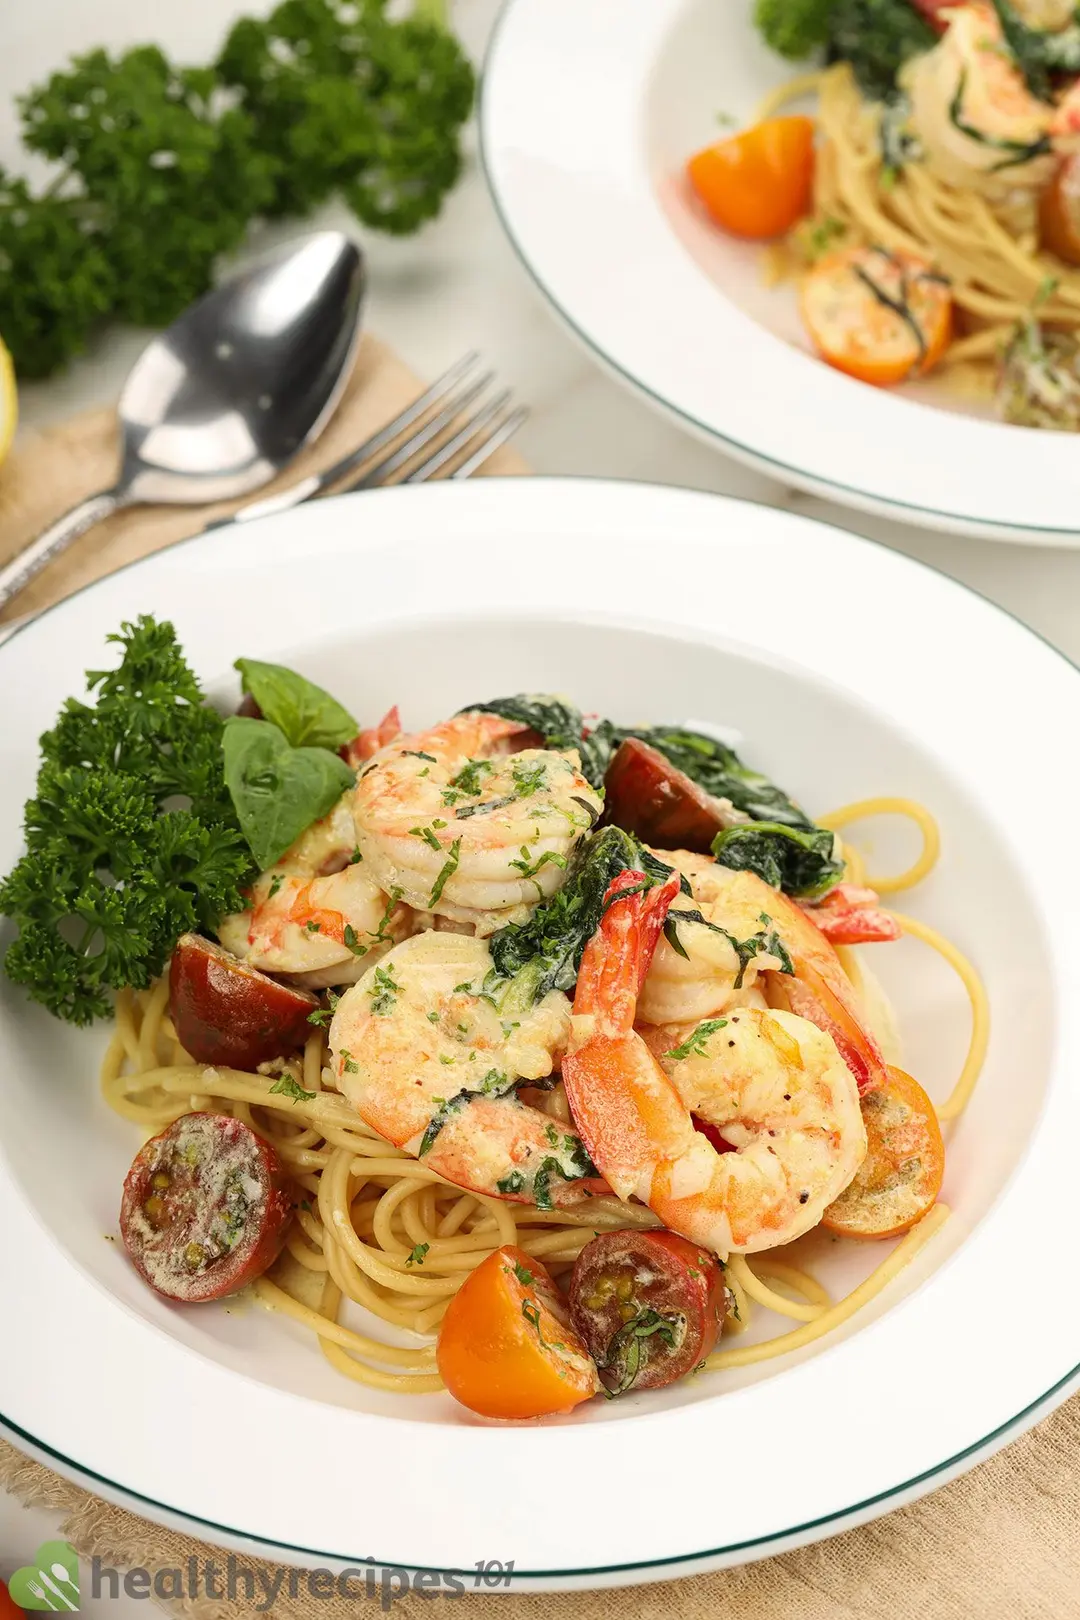 What Makes Our Tuscan Shrimp Healthier than Others